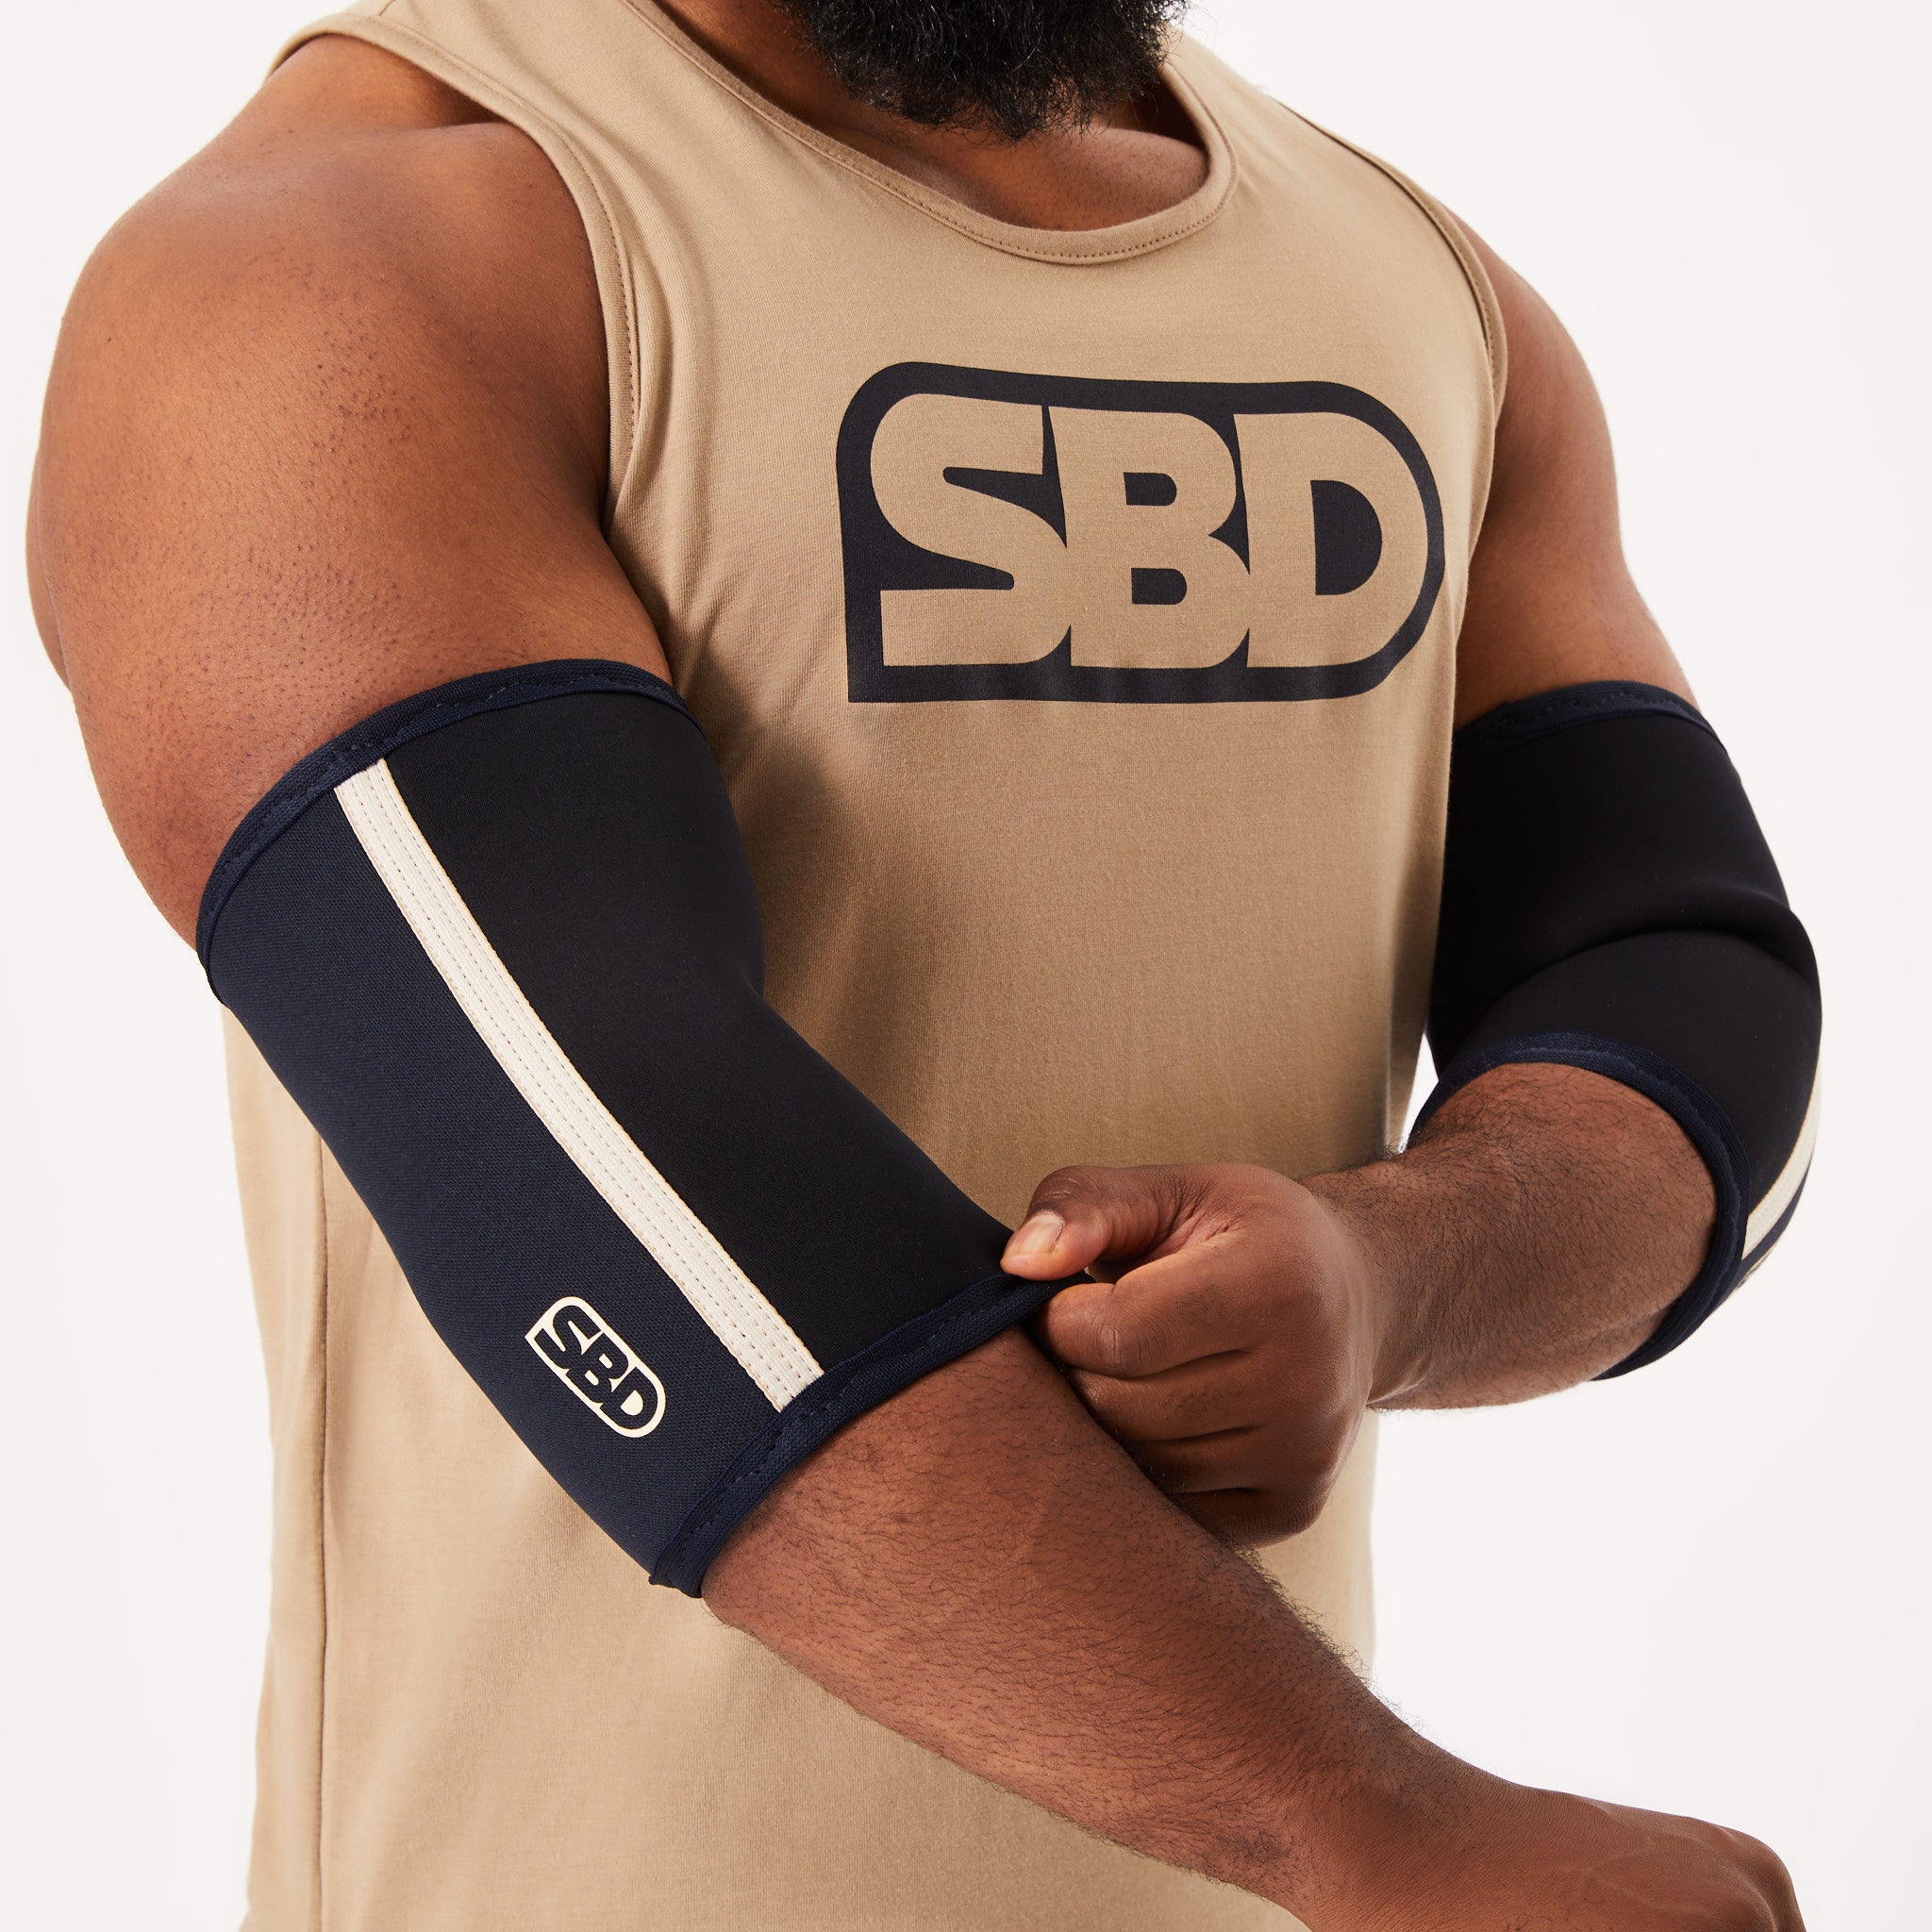 SBD Defy – Inner Strength Products